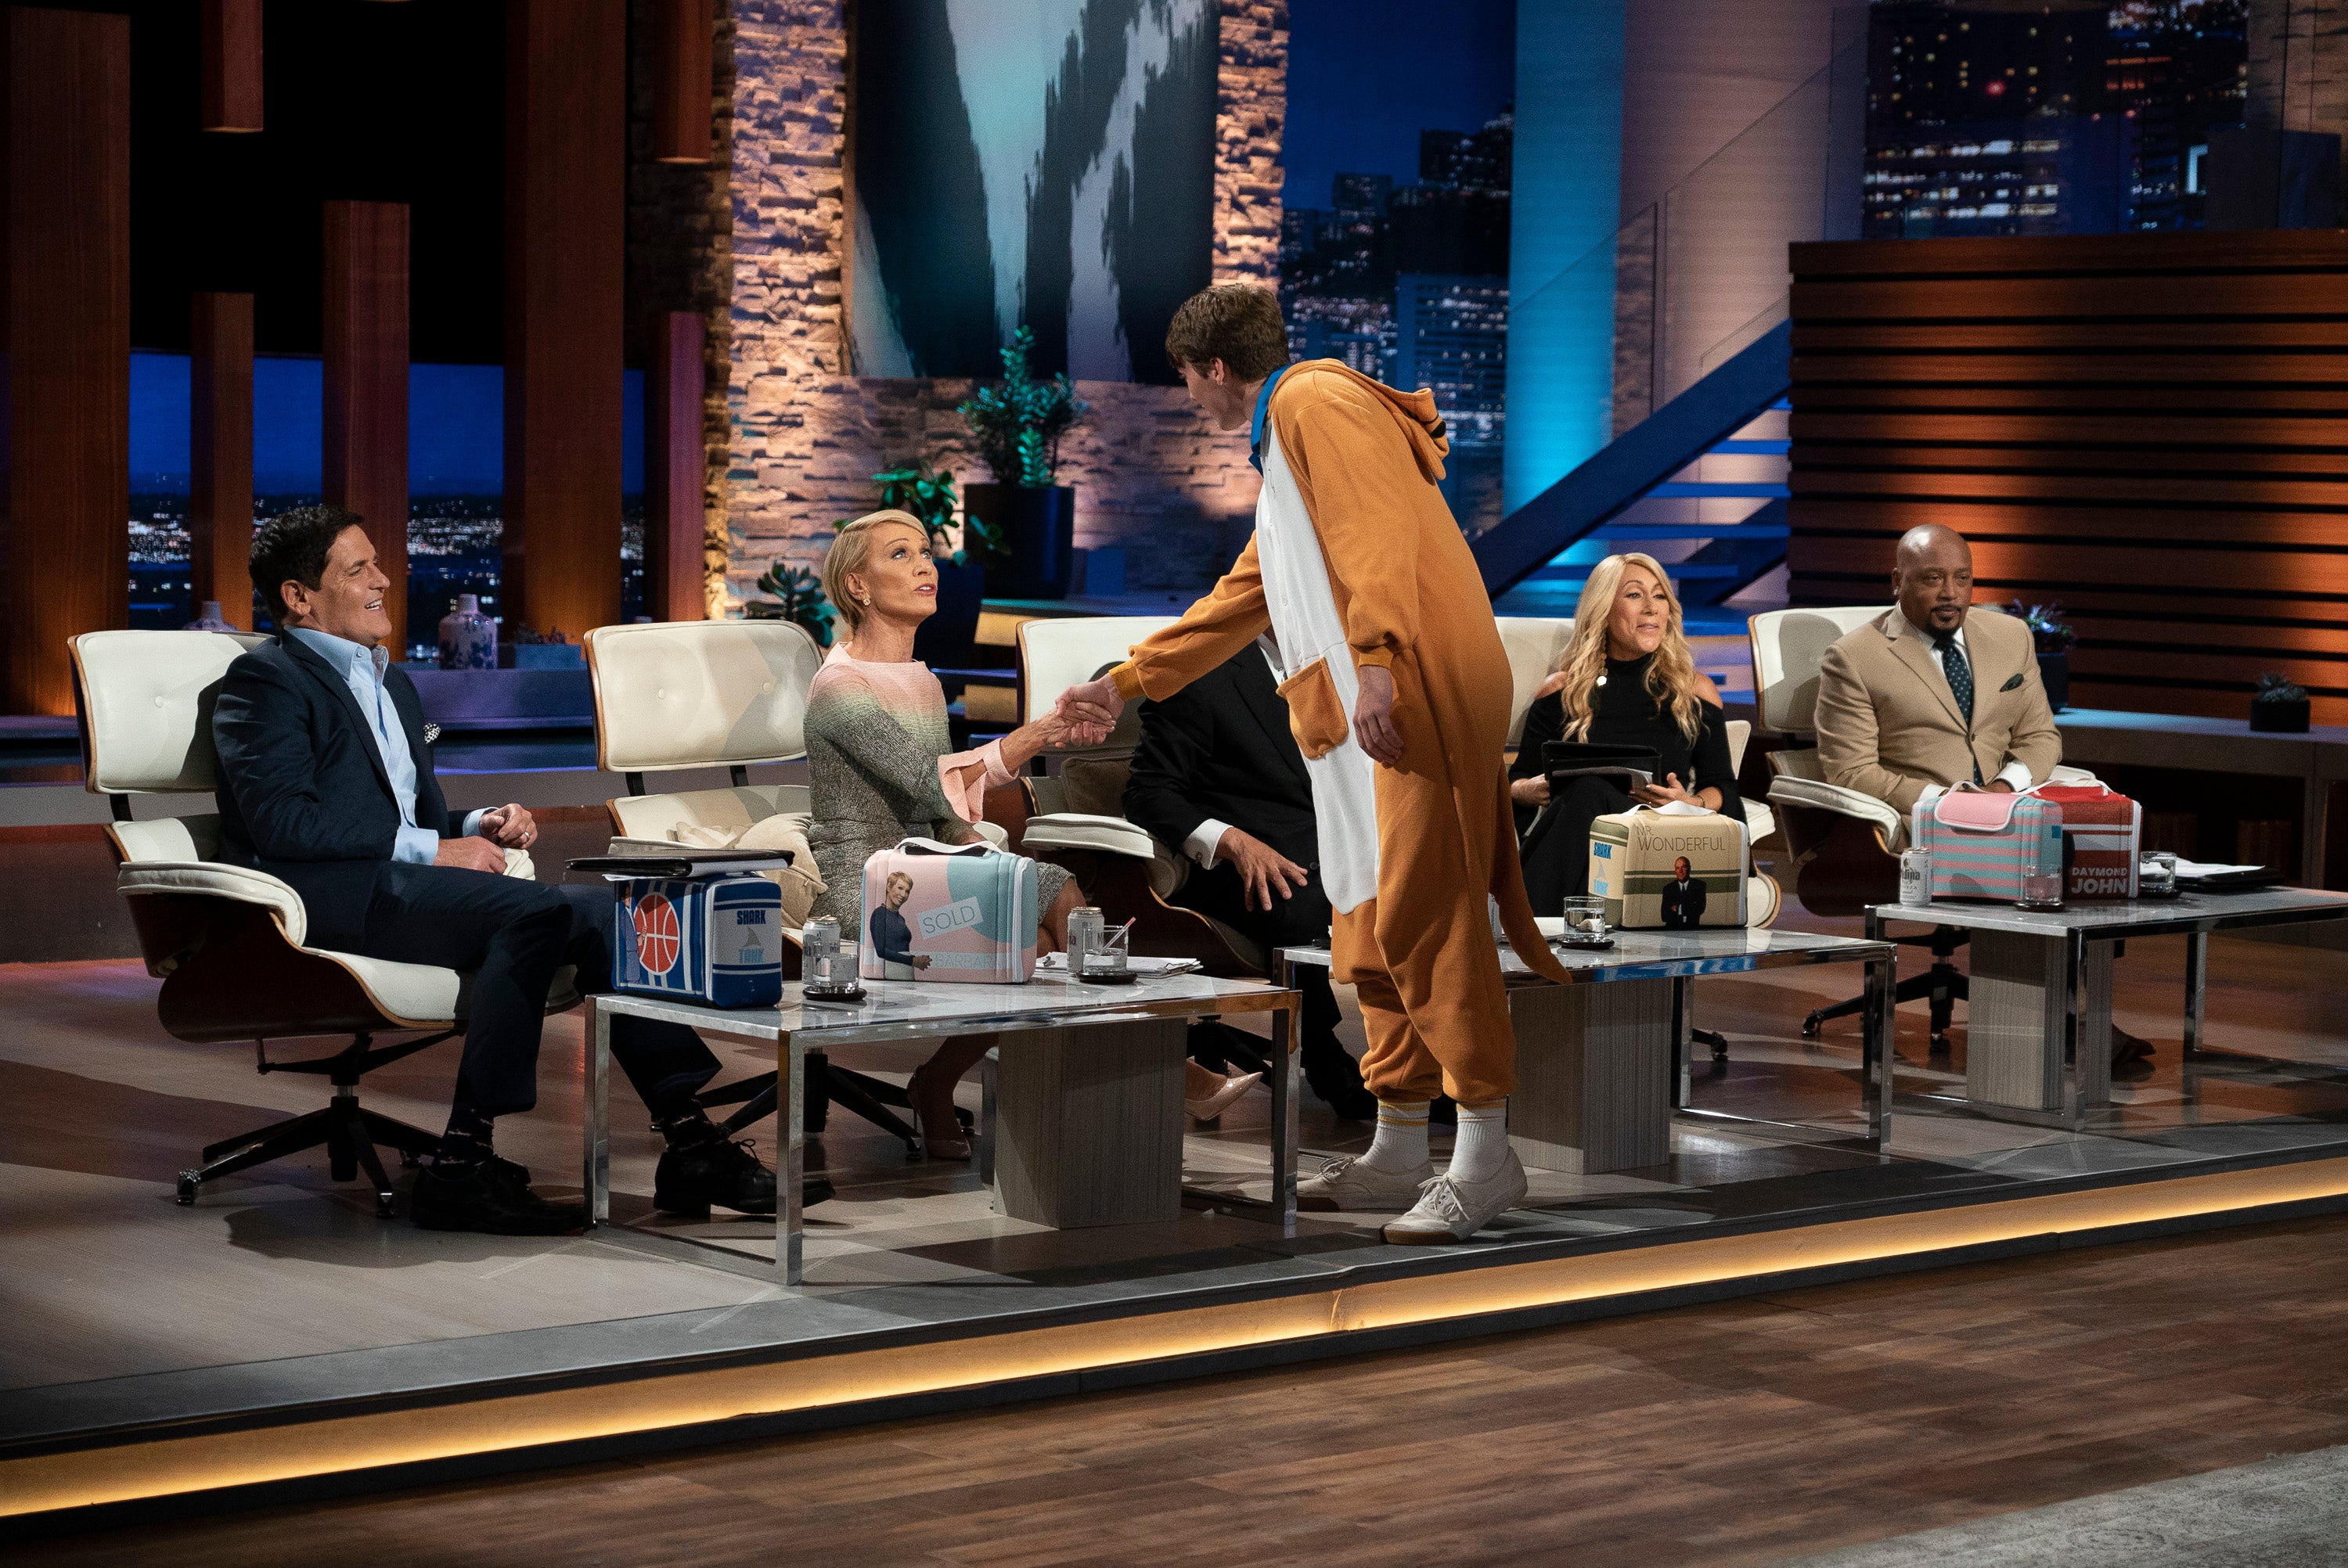 The Kanga team appeared on Shark Tank and made a deal. 